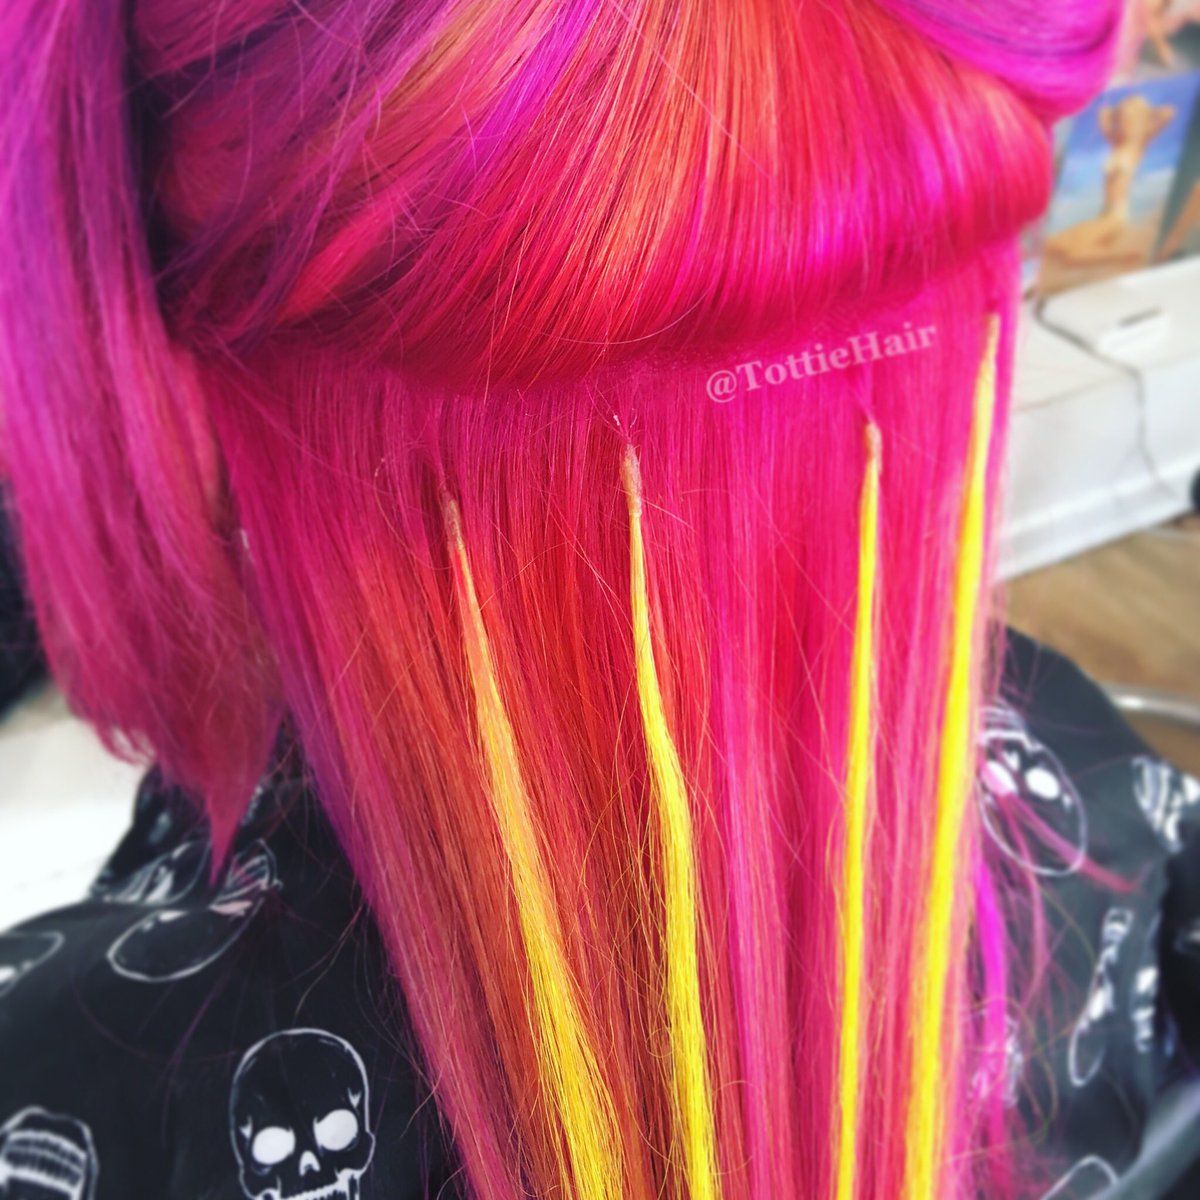 Hair extensions aren’t just for length and volume, but can be added for a pop of colour 💕

#haircolour #vividhair #ombre #unicornhair #unicorntribe #hairextensions #haireducation #prebondedhair #euphoriaone #yellowhair #pinkhair